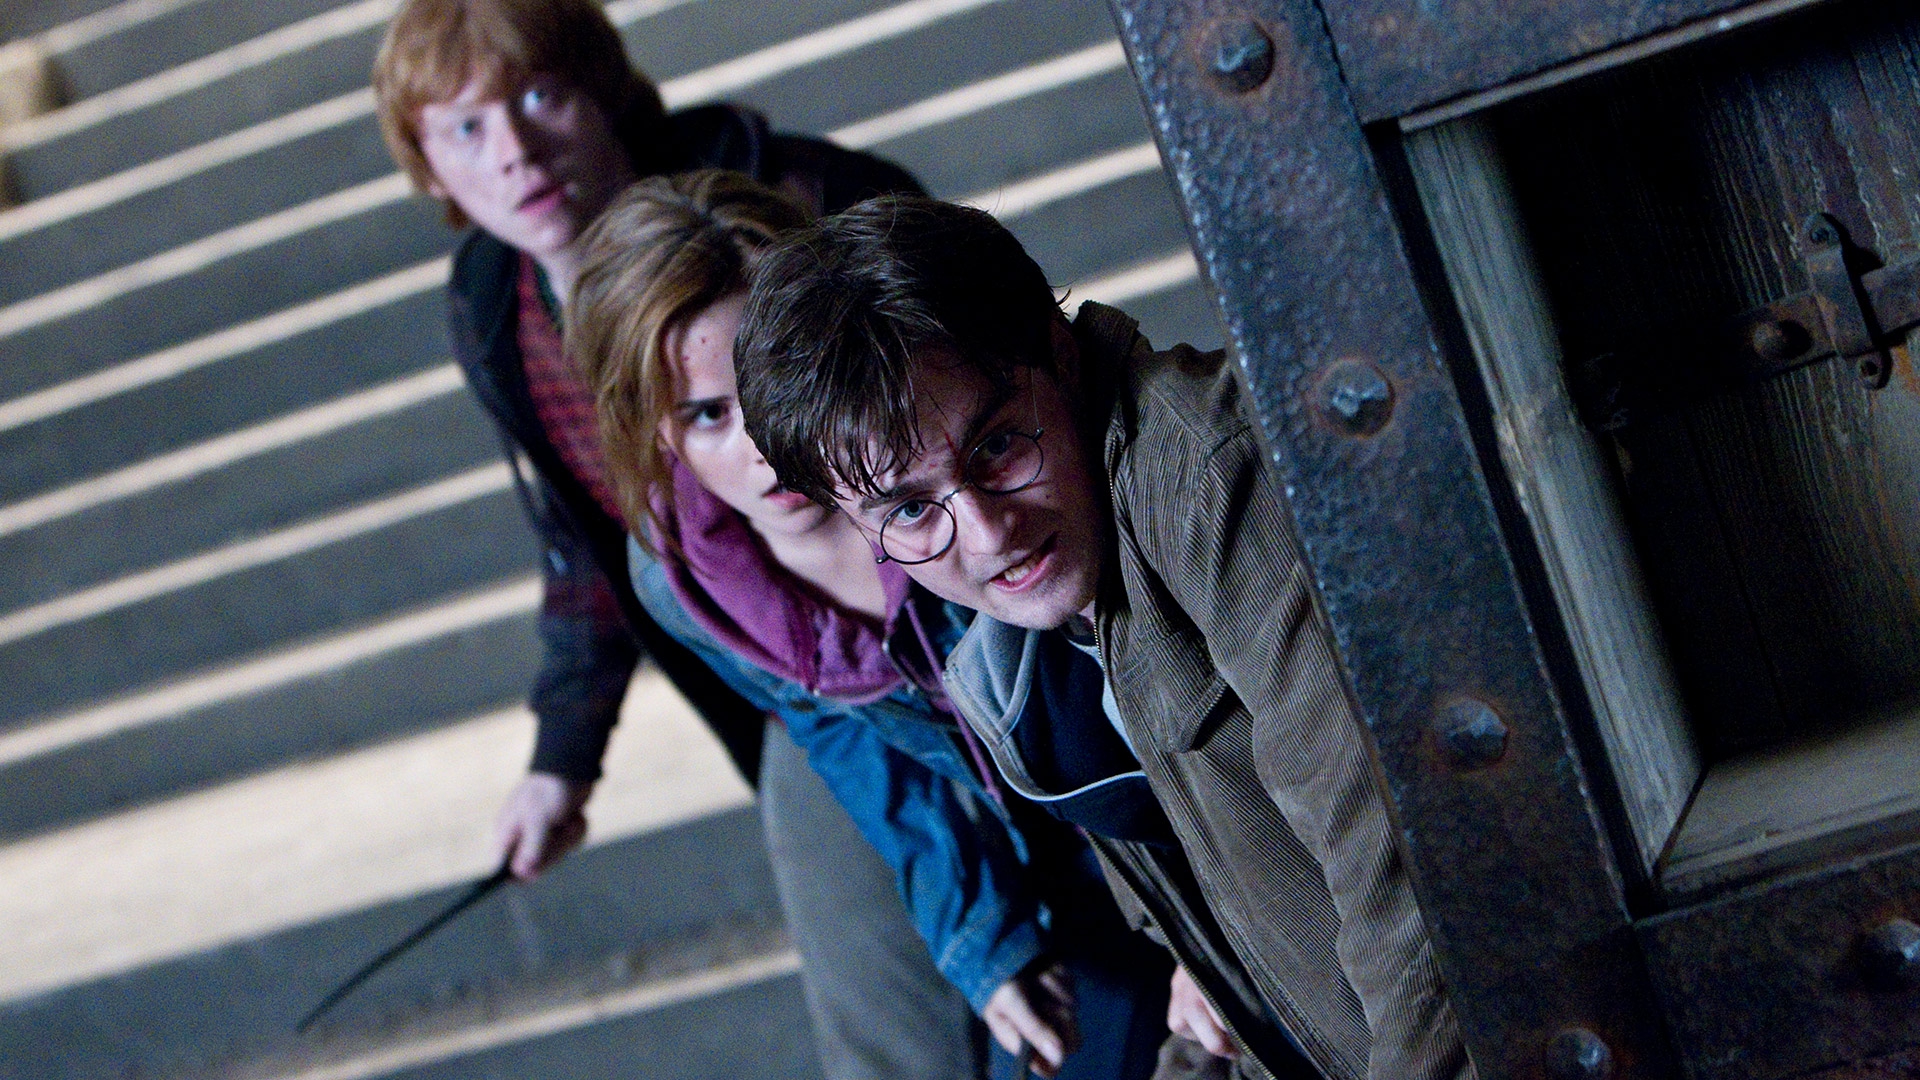 harry potter and the deathly hallows part 2 watch online